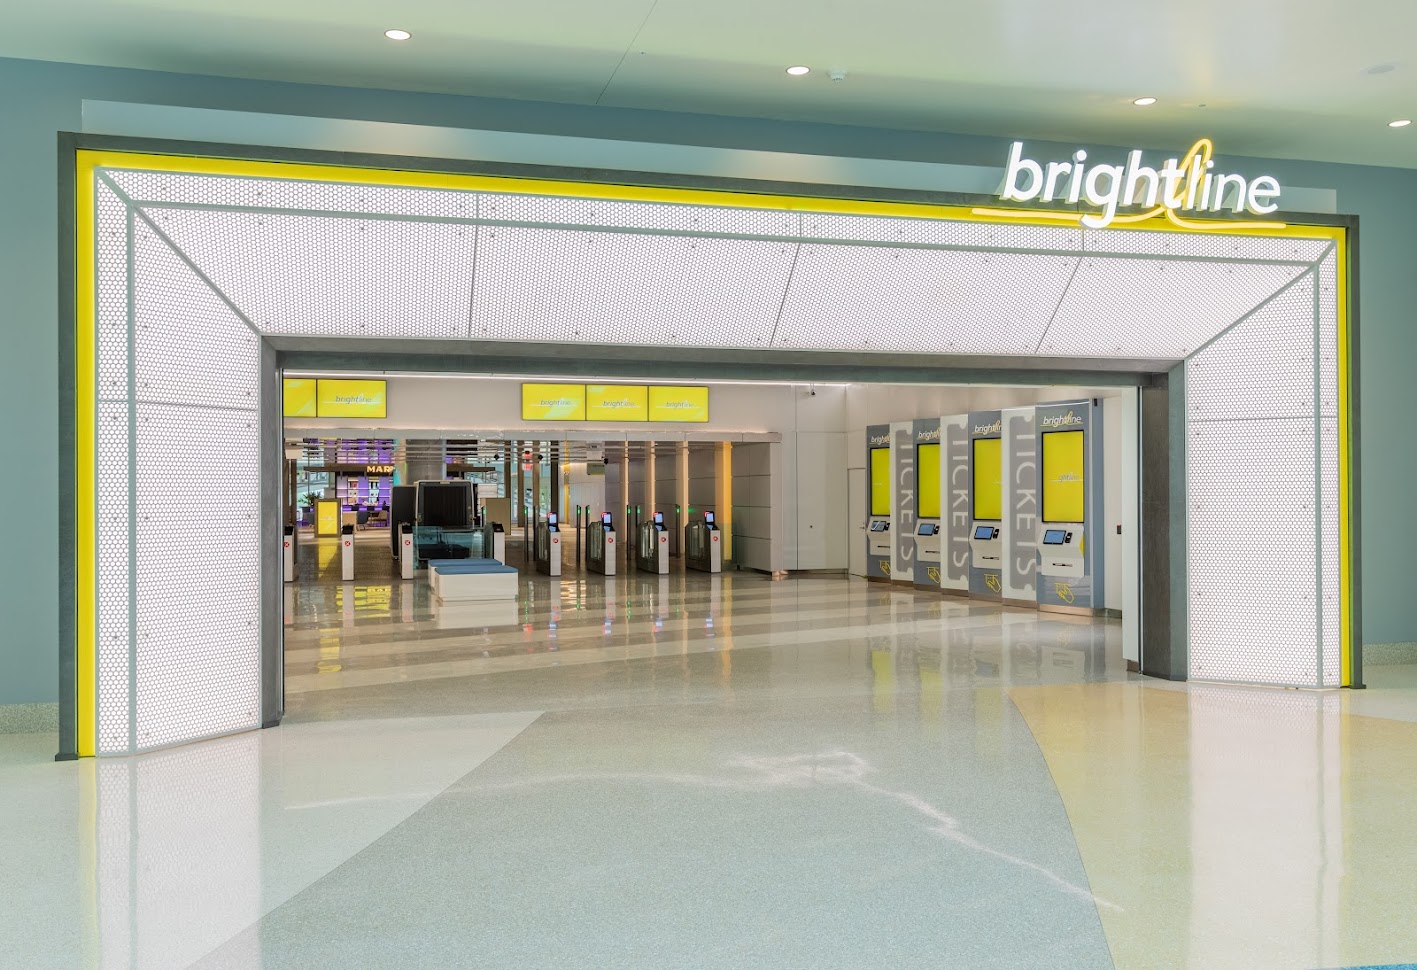 Tickets and Prices Revealed for Brightline’s Miami to Orlando Route